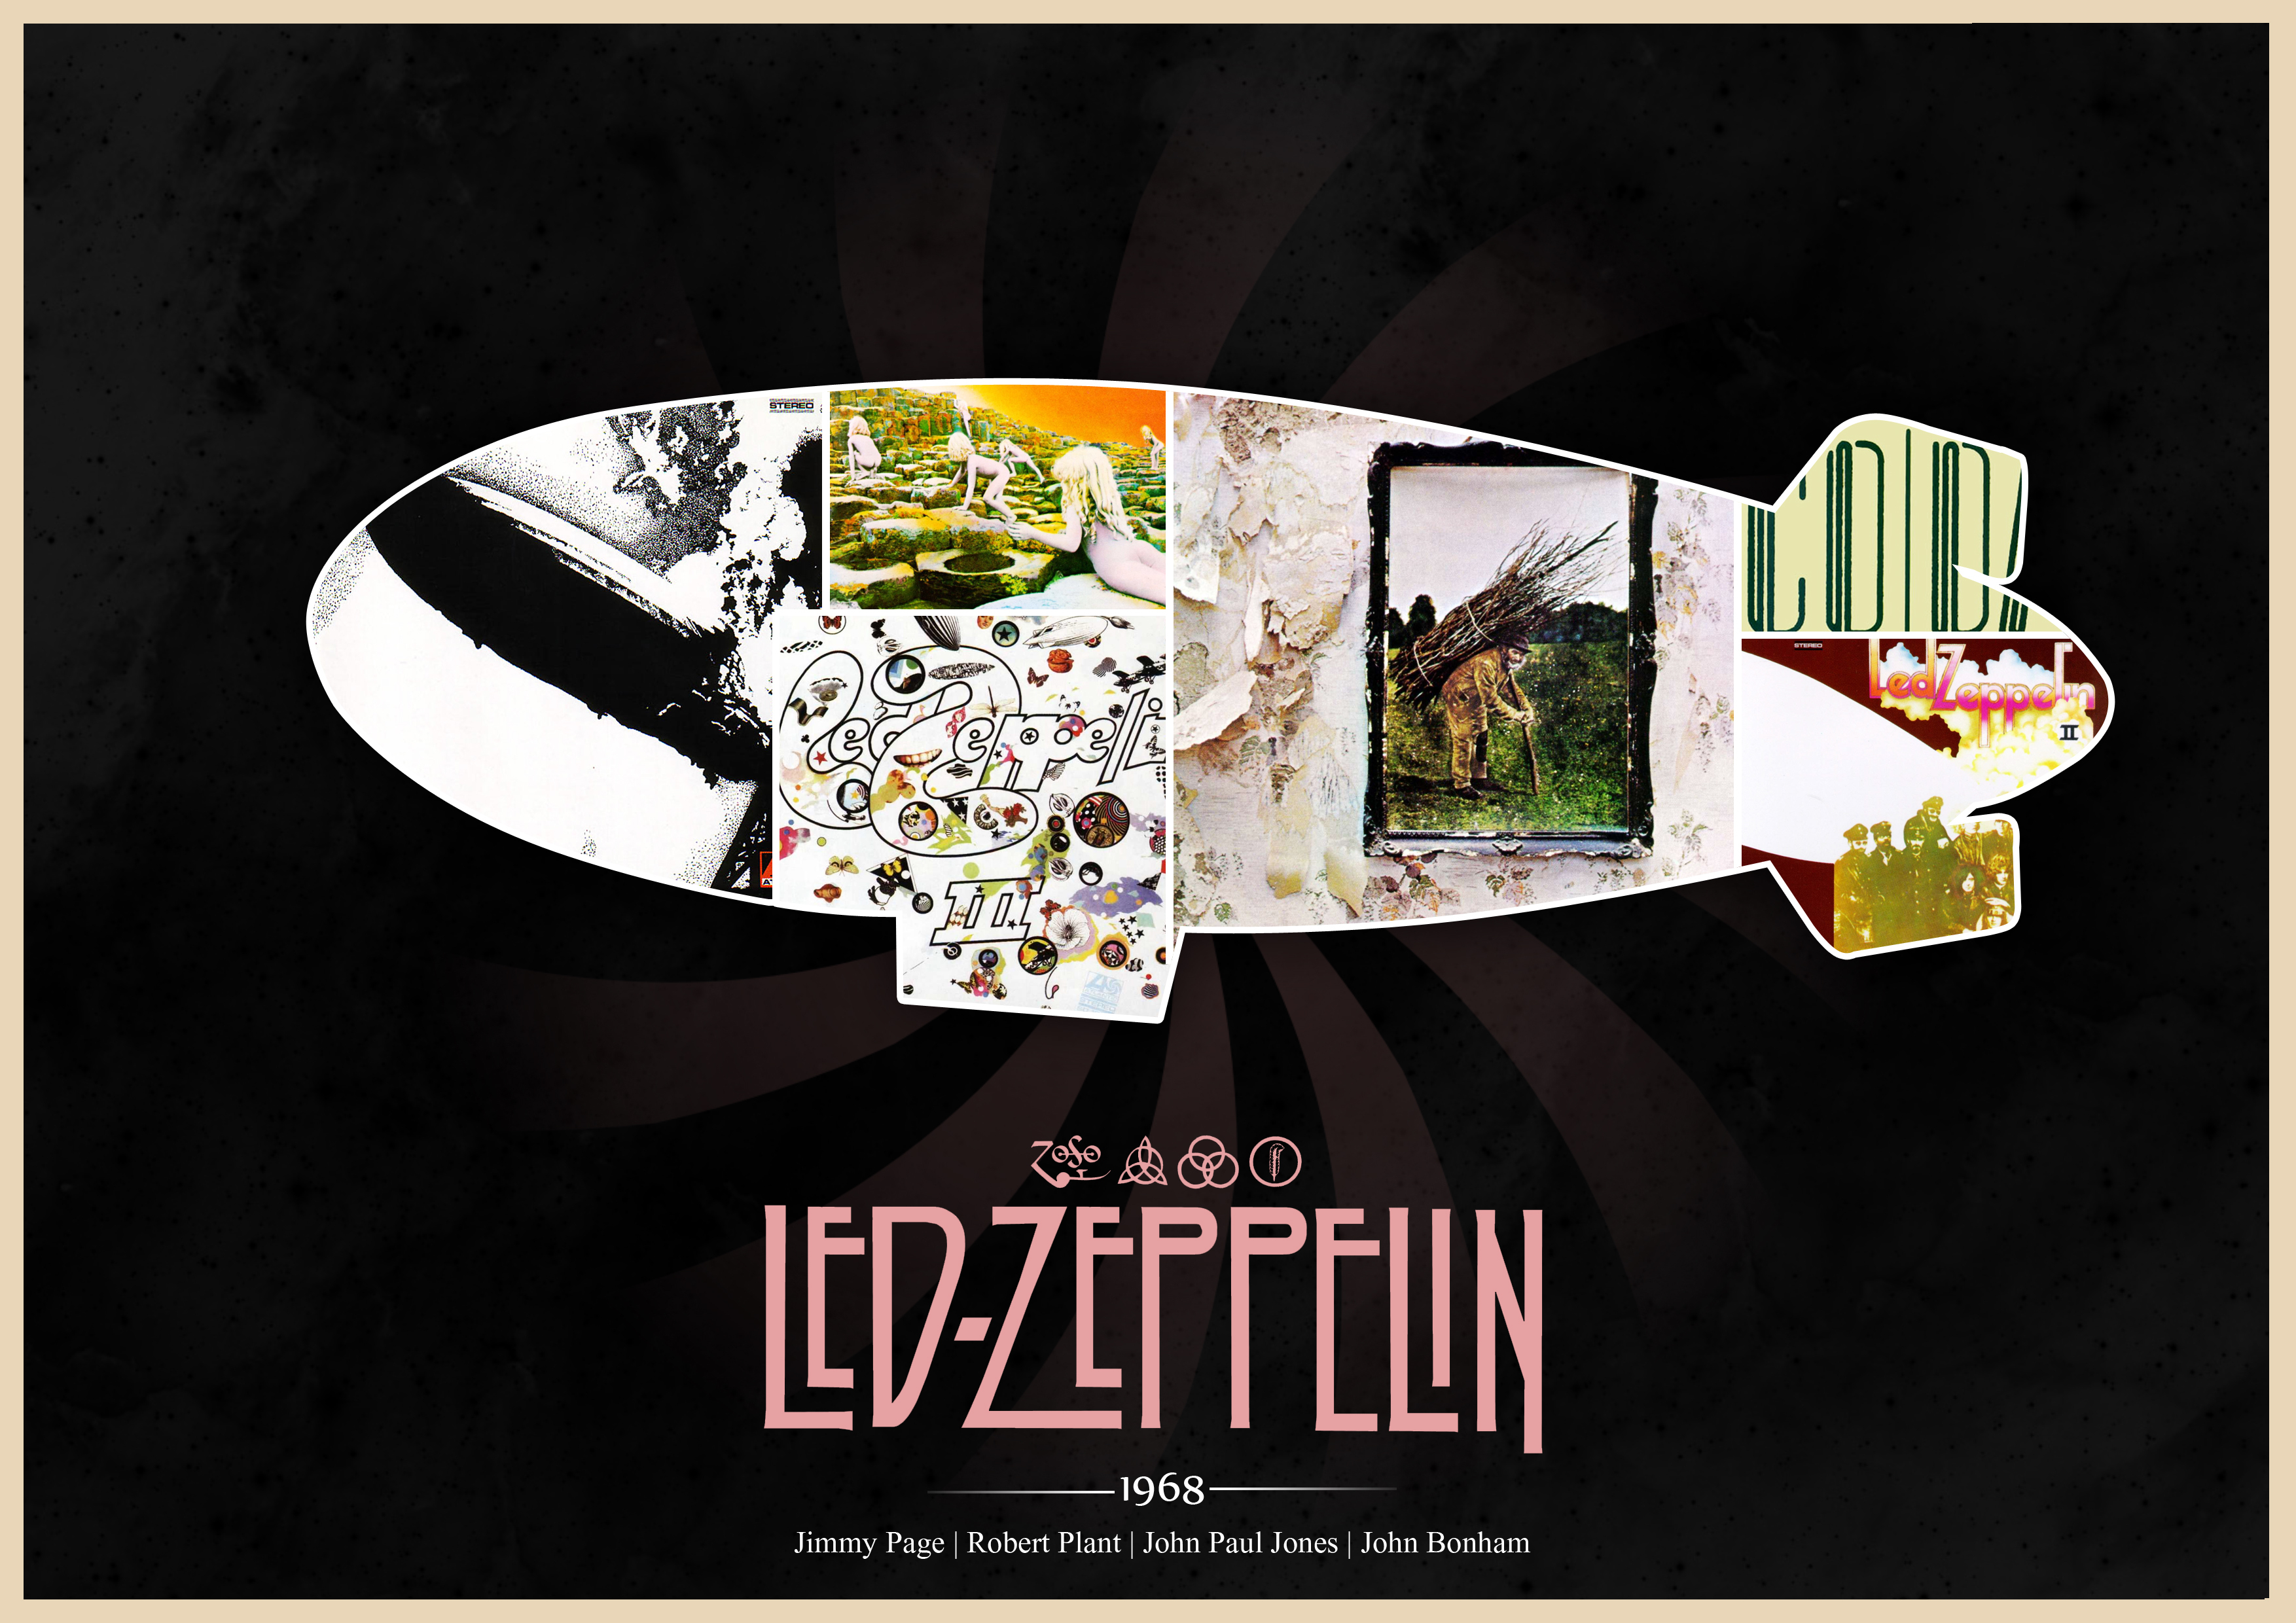 led, Zeppelin, Hard, Rock, Classic, Groups, Bands, Jimmy, Page, Robert, Plant, Album, Covers Wallpaper